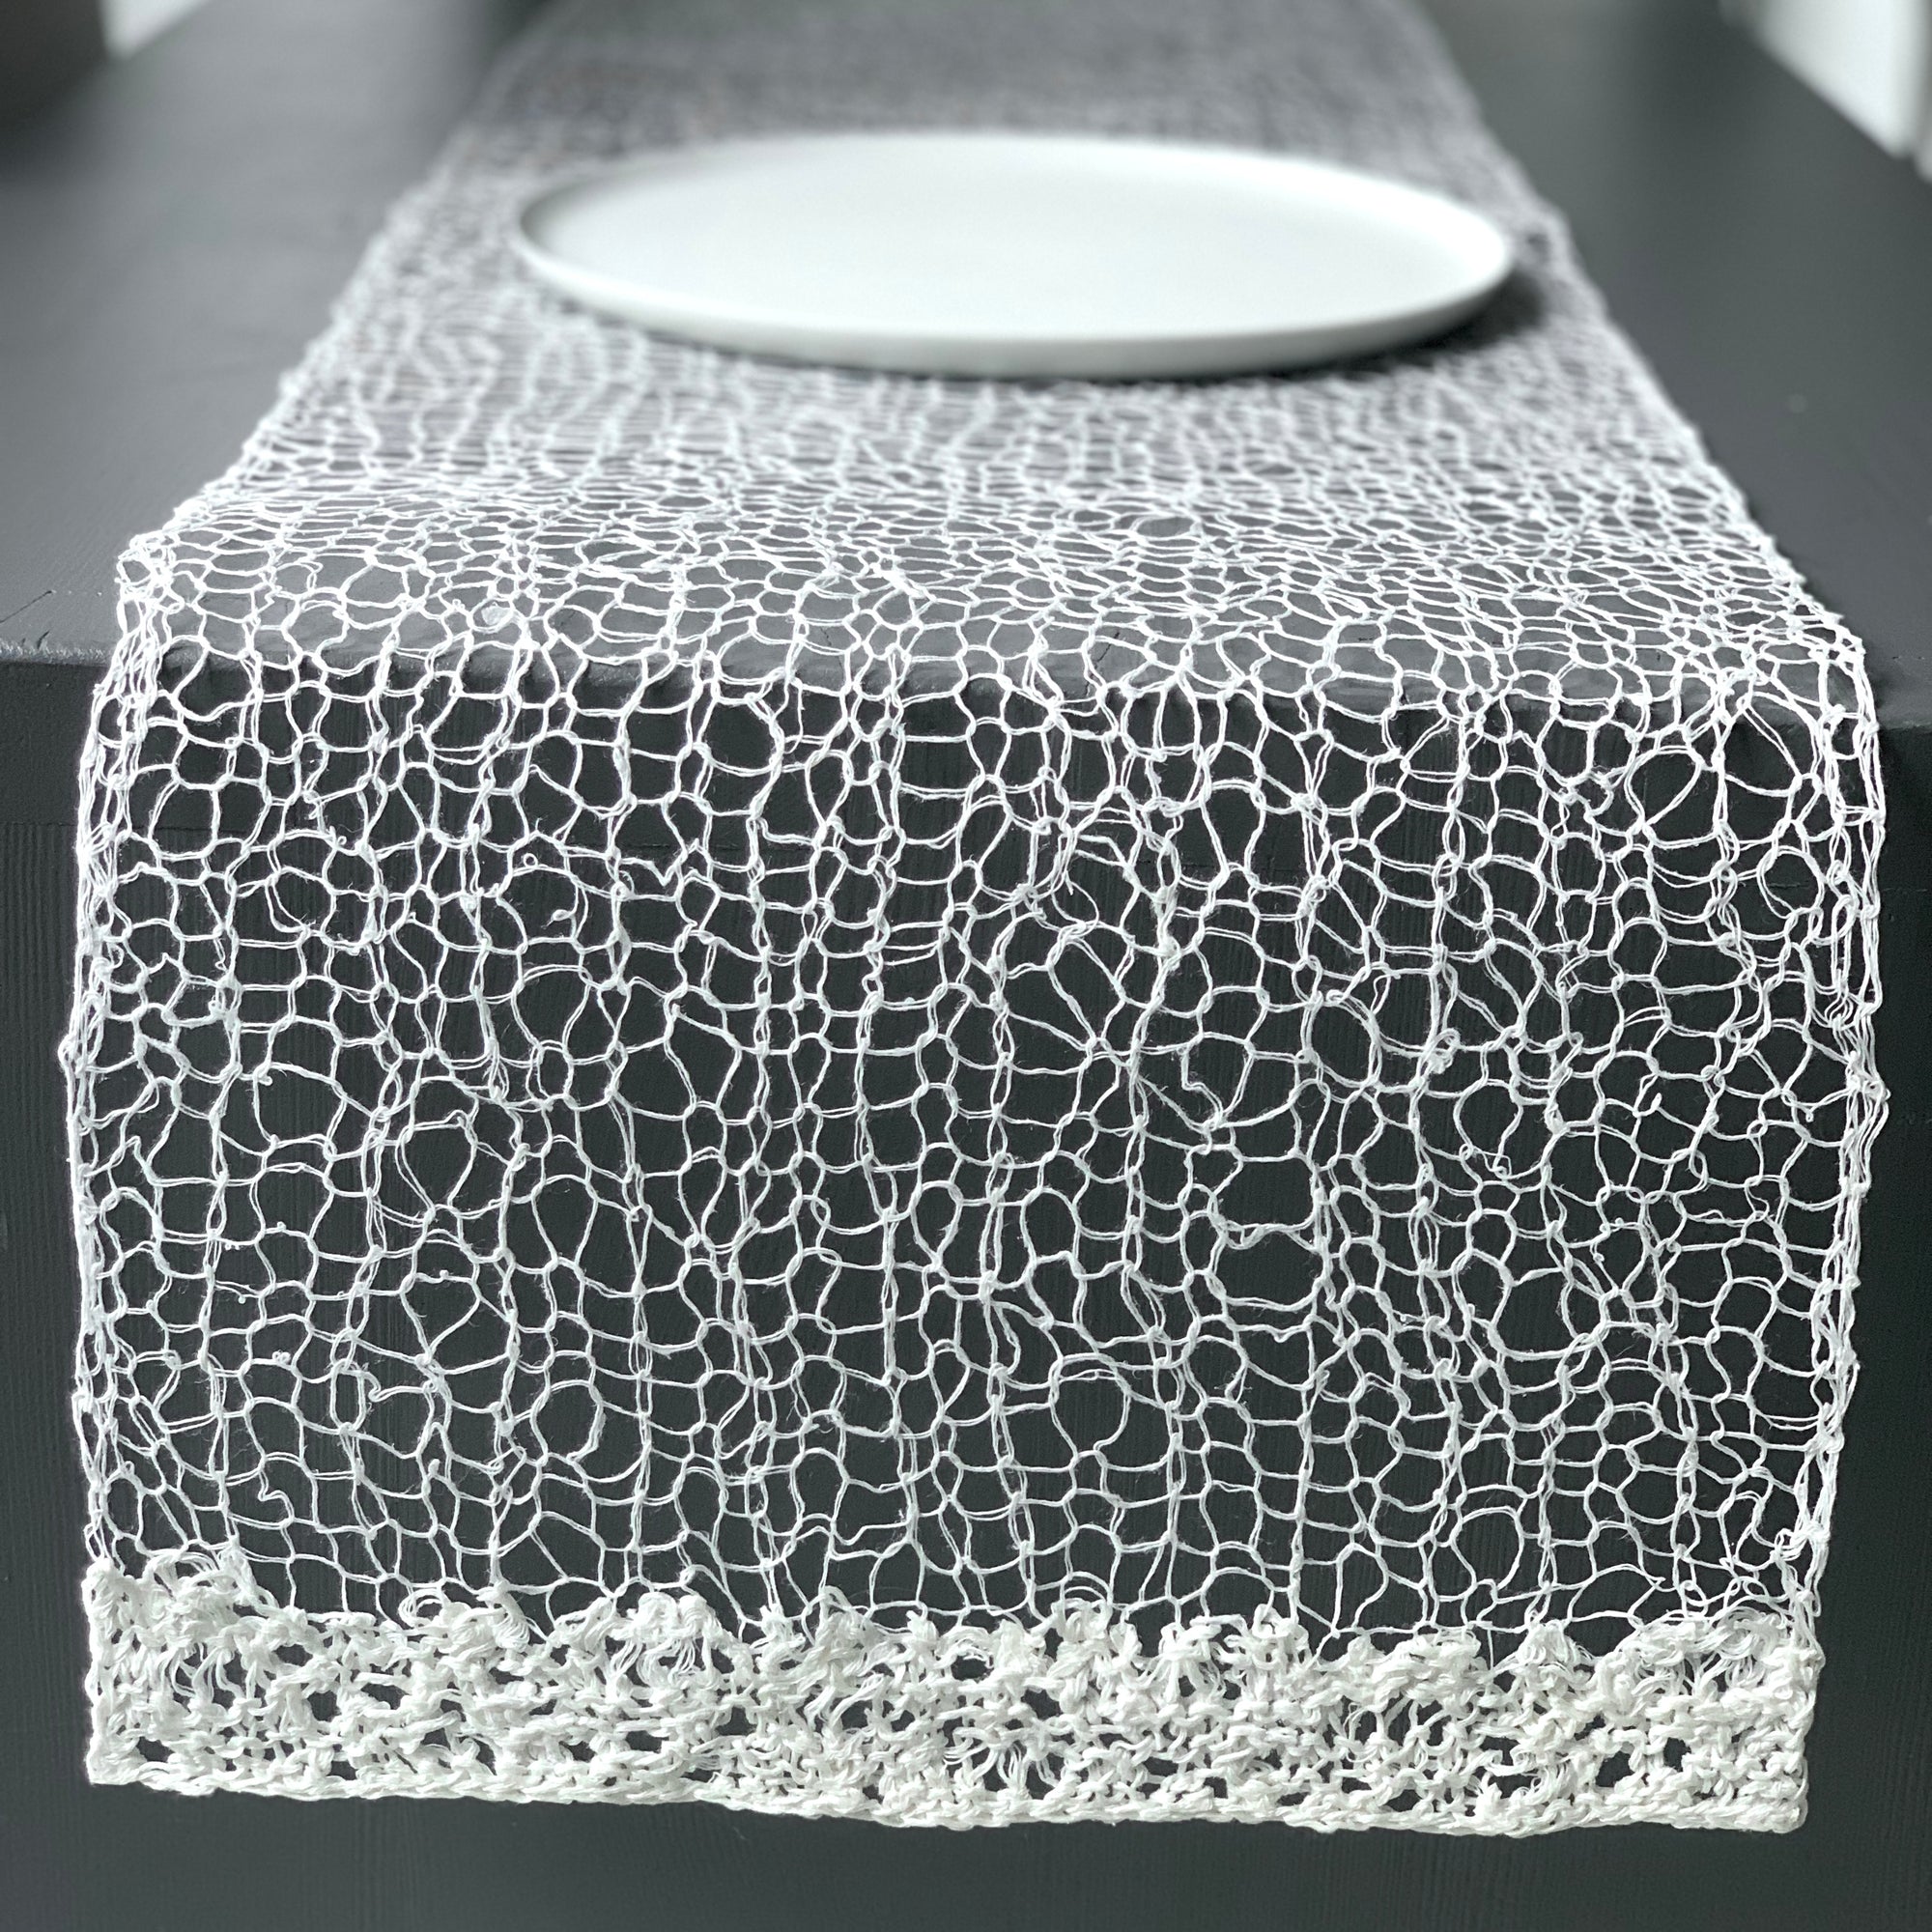 Linen table runner "Lace" 35x275/ 40x275 cm in white and grey color